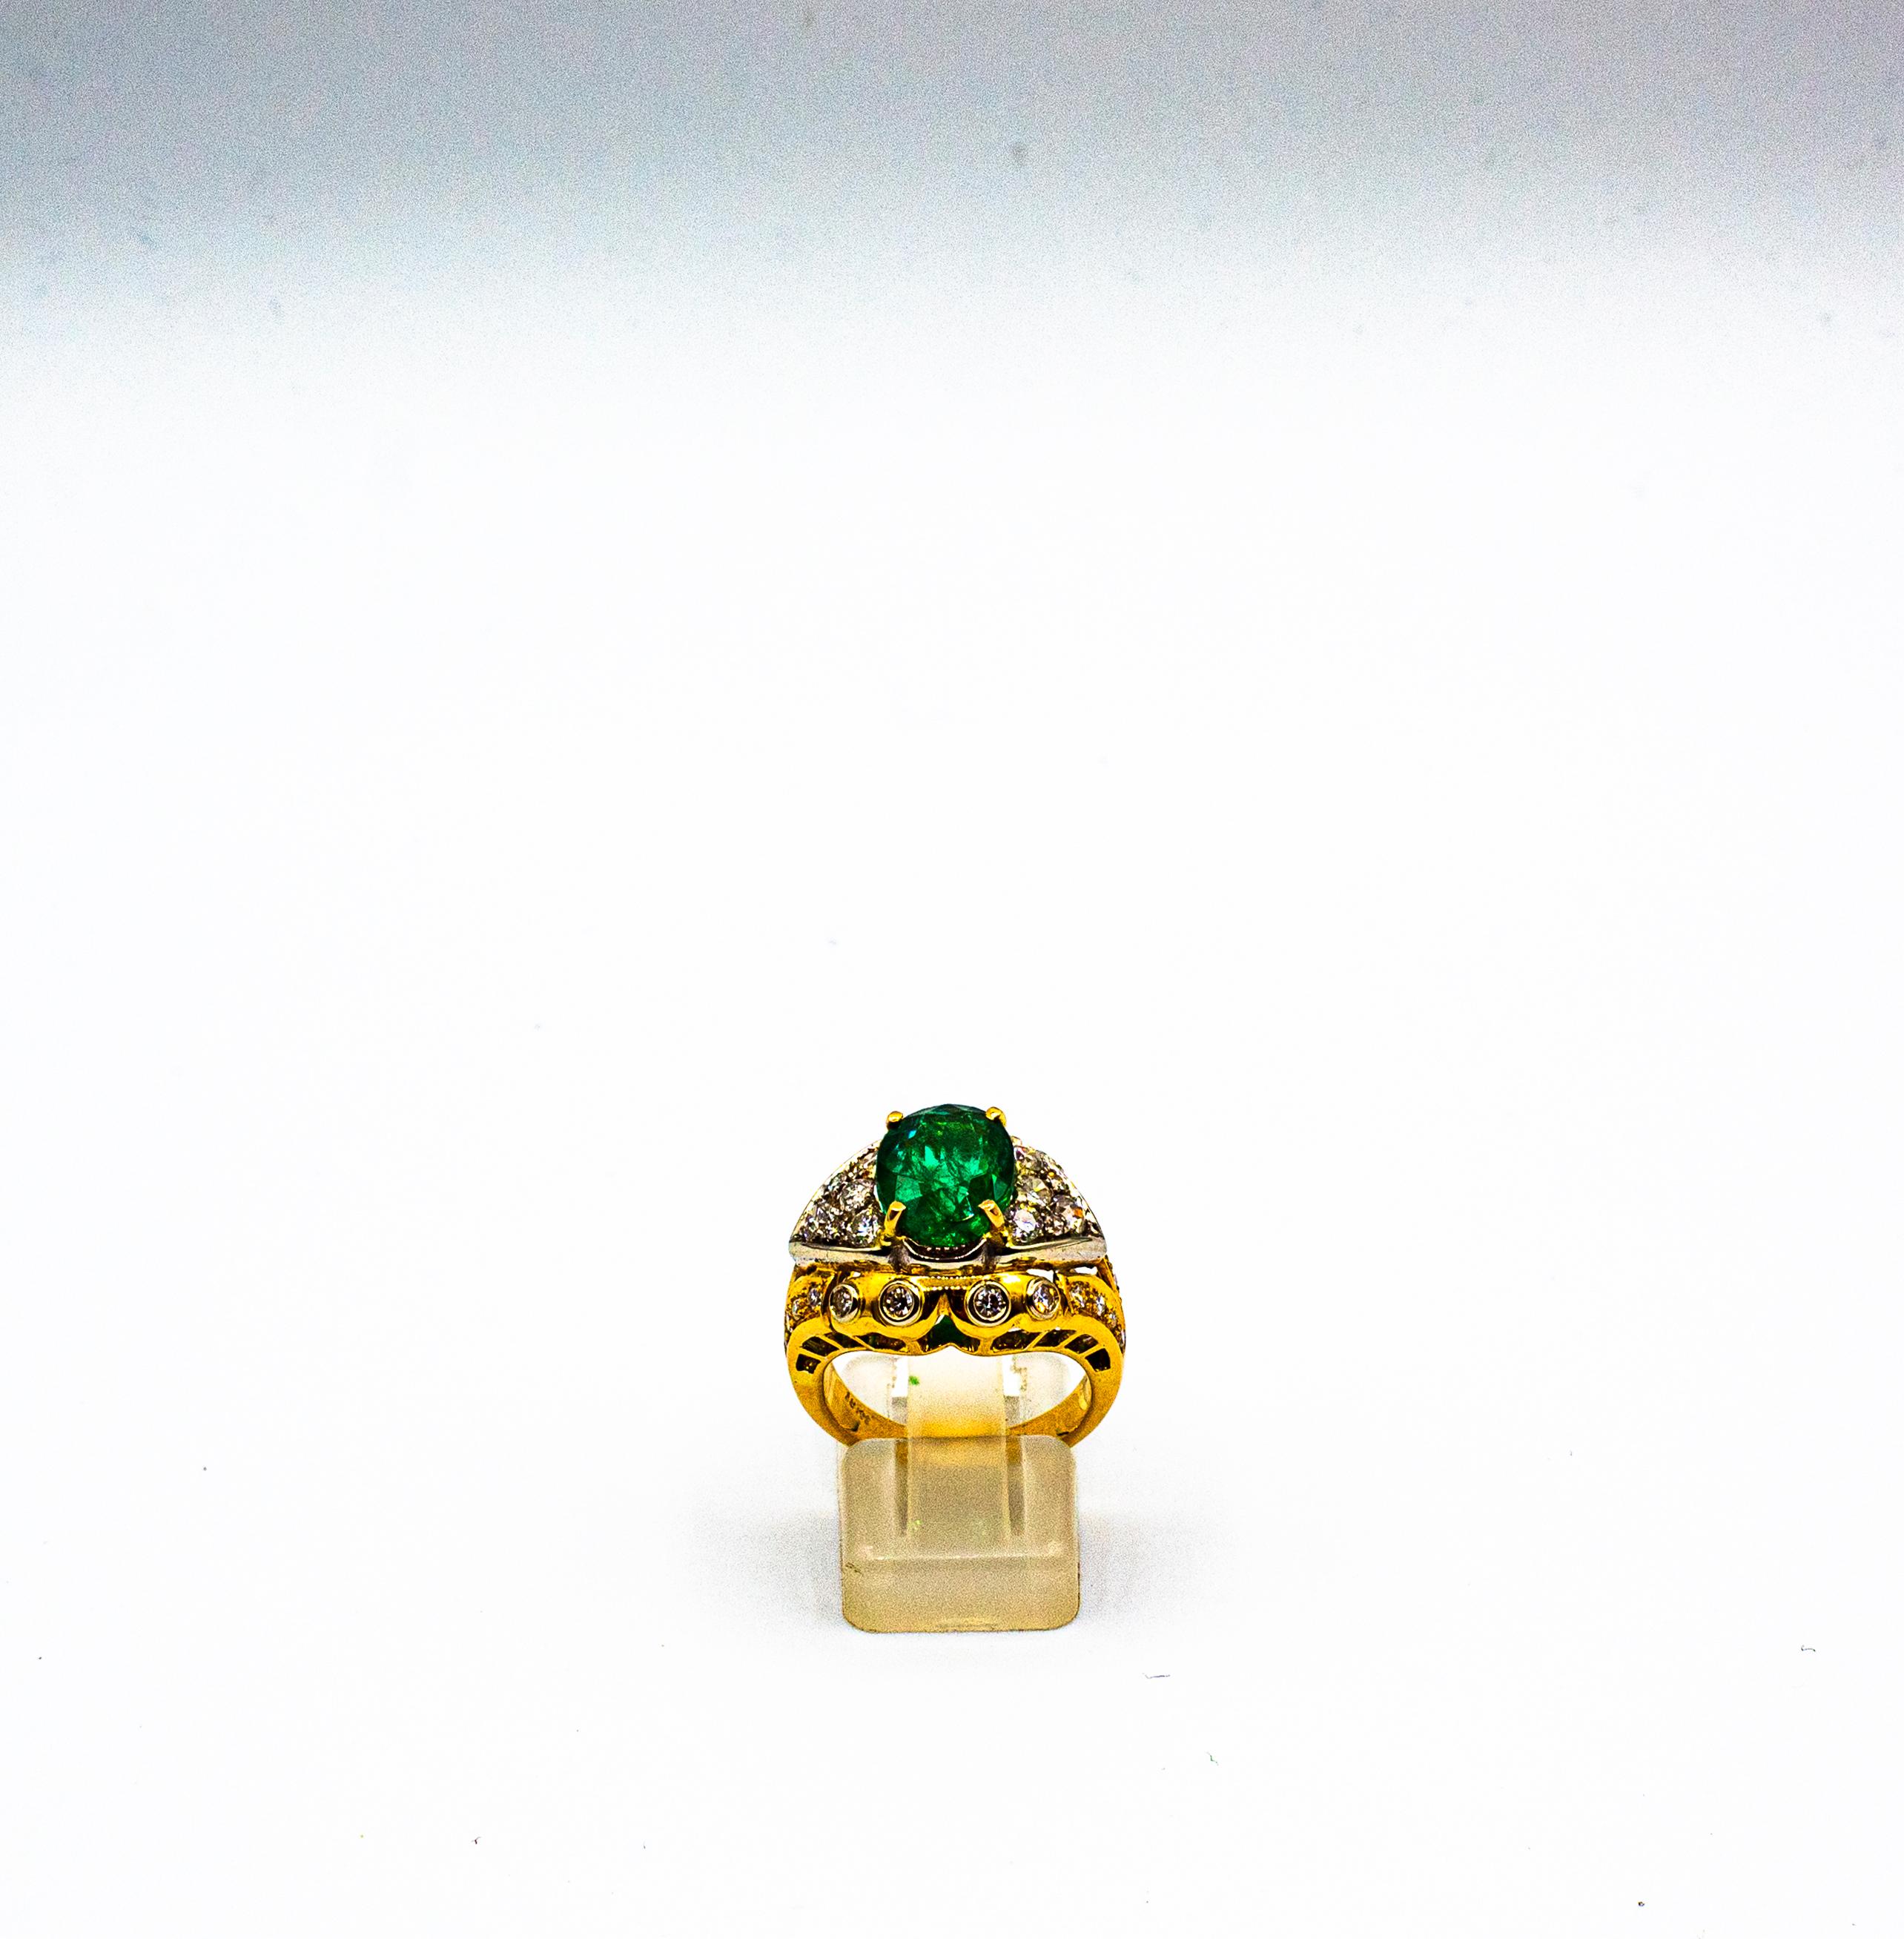 This Ring is made of 18K Yellow Gold White Gold.
This Ring has 1.50 Carats of White Modern Round Cut Diamonds. Color: H-G Clarity: VVS1
This Ring has a 3.70 Carats Natural Zambia Oval Cut Emerald.
This Ring is inspired by Art Deco.

Size ITA: 10.5